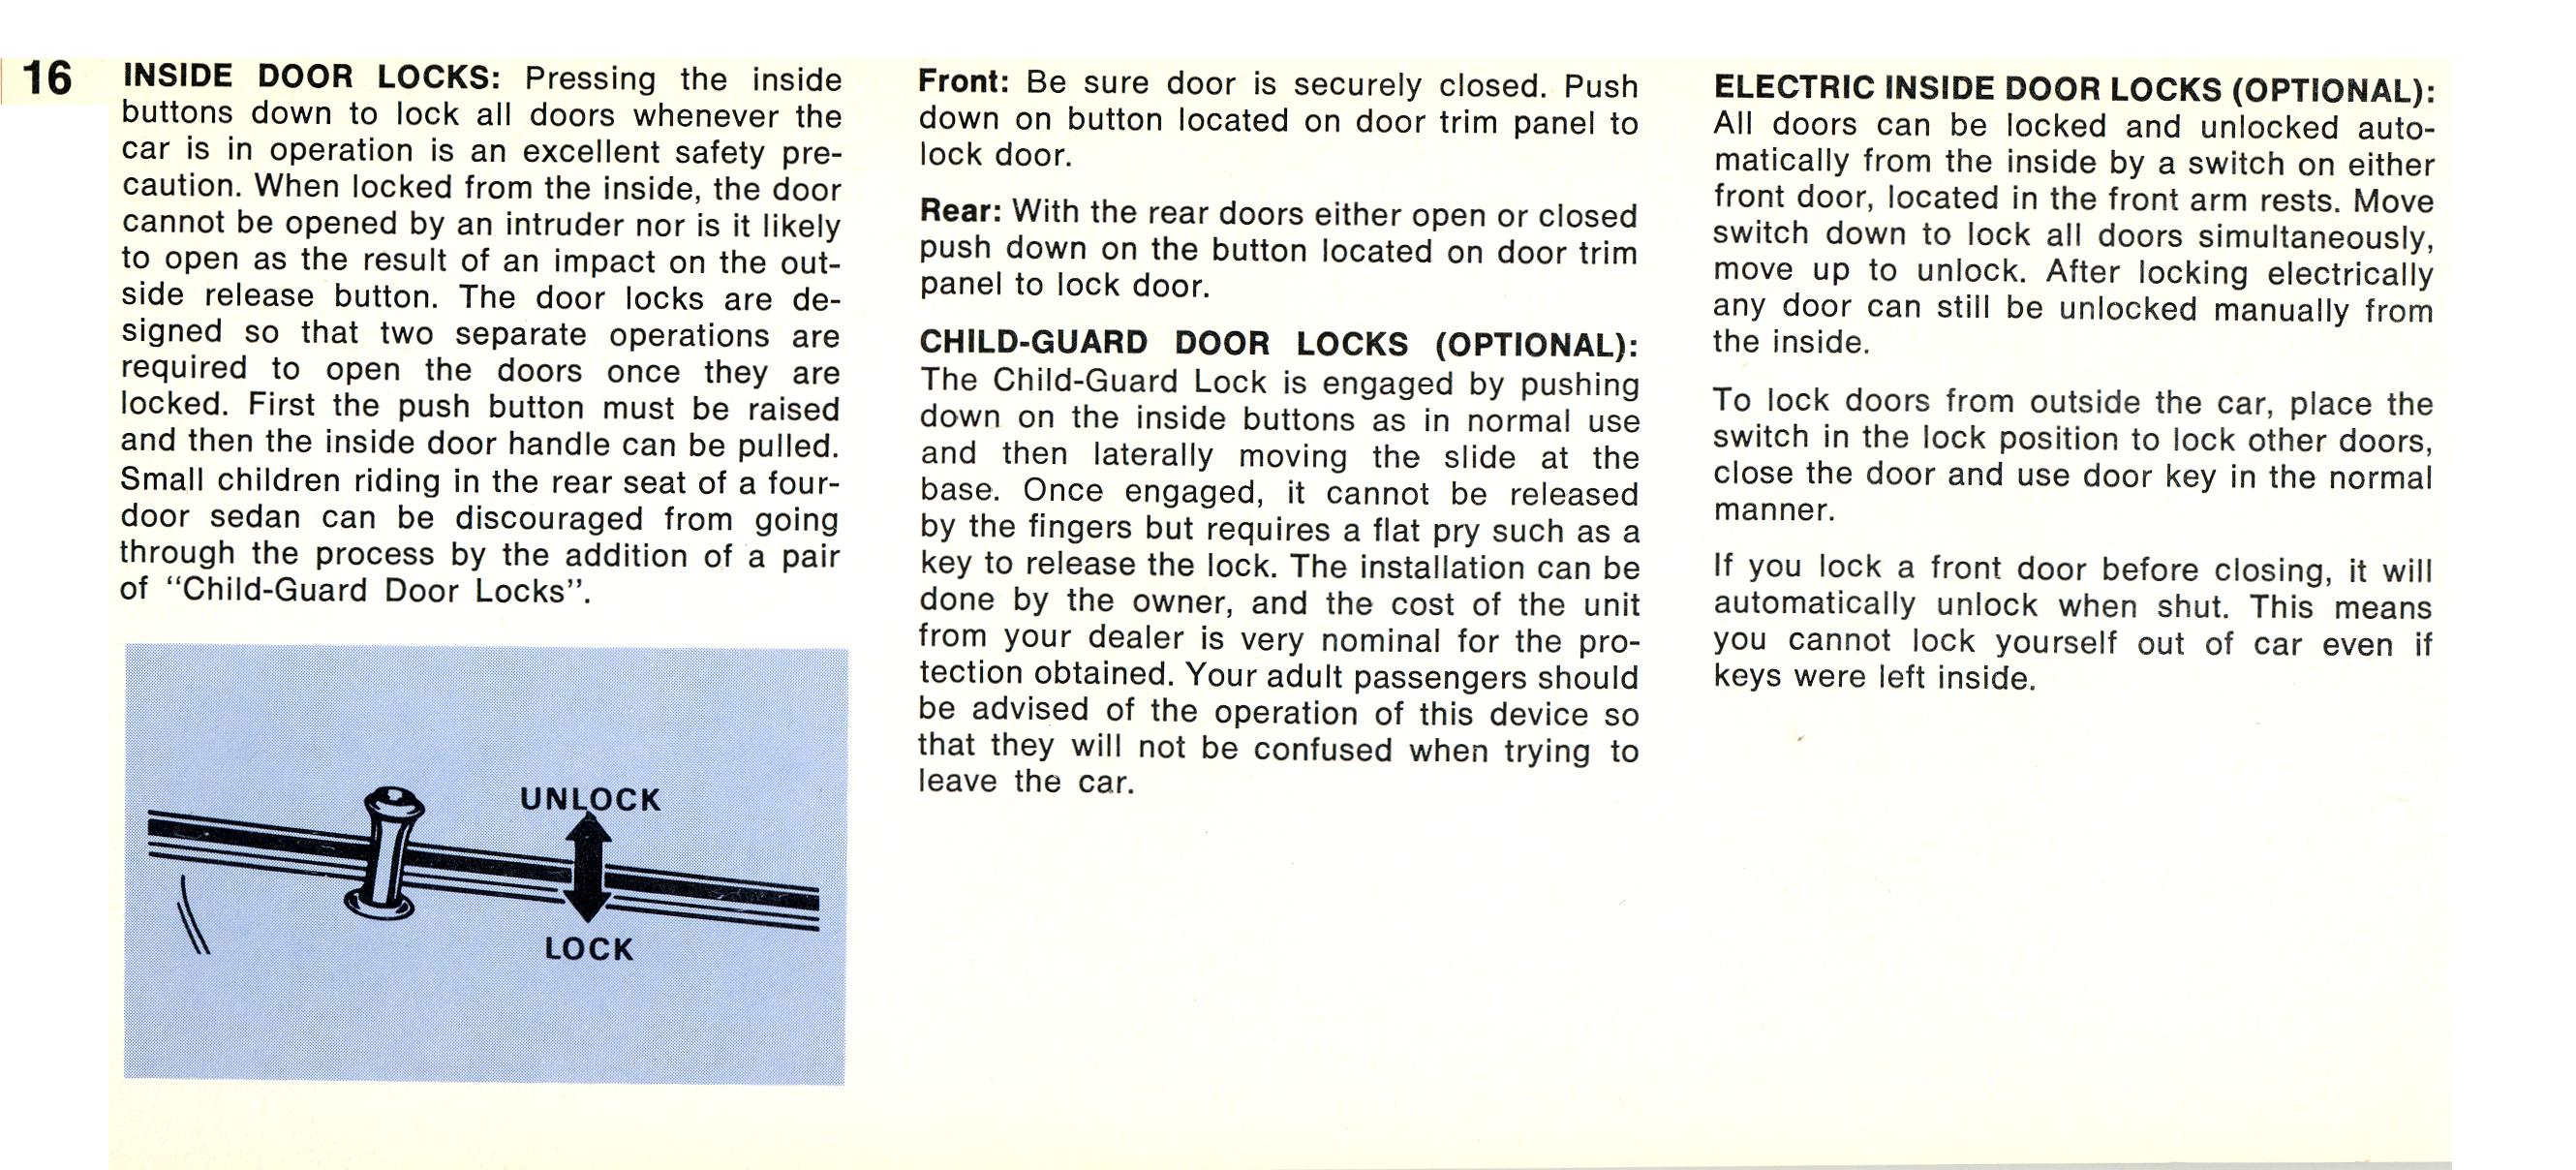 1968 Chrysler Imperial Owners Manual Page 43